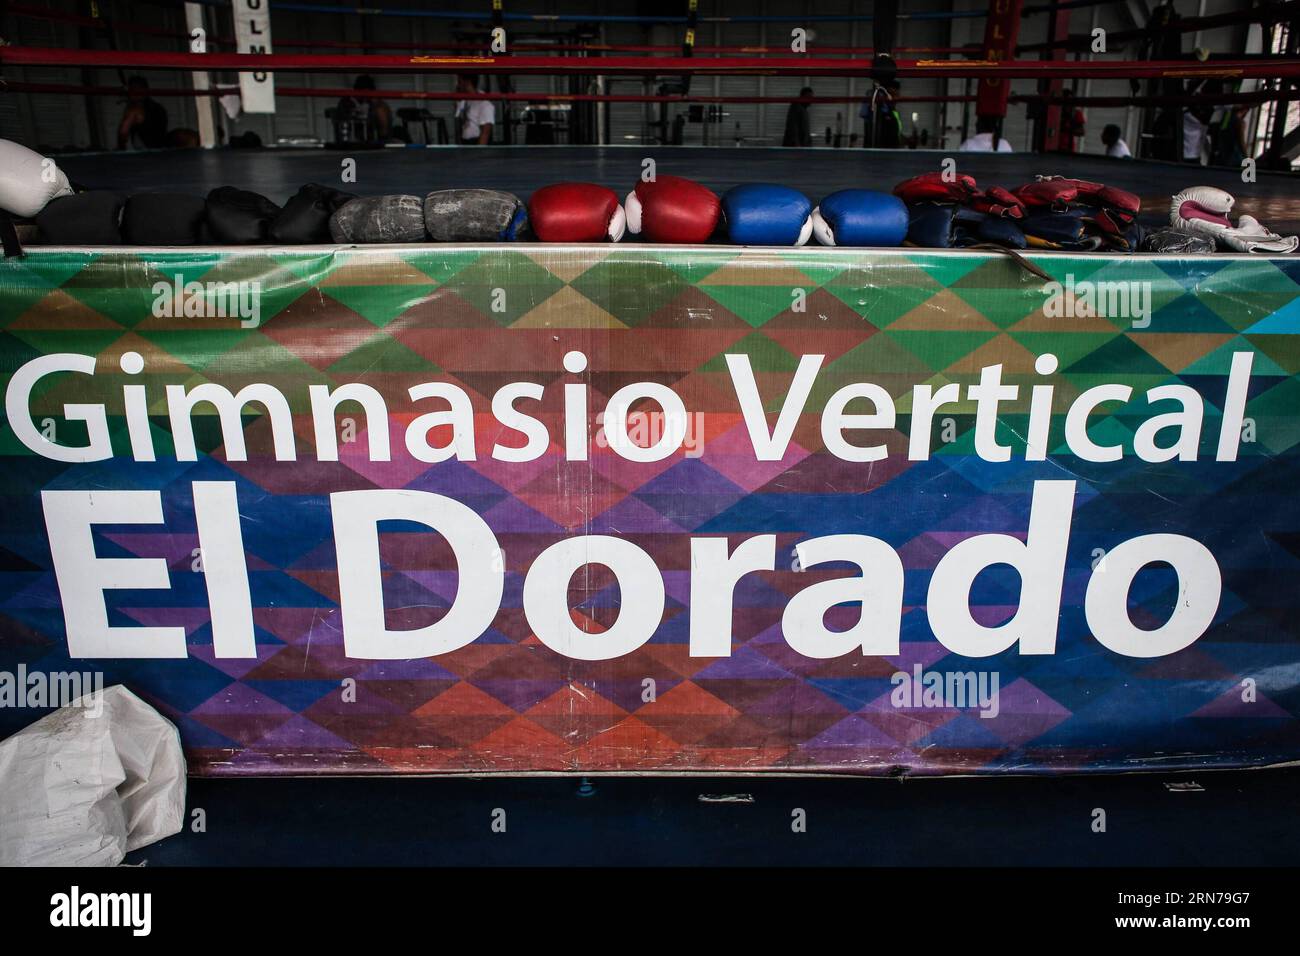 Image taken on Aug. 19, 2015 shows boxing gloves at El Dorado Vertical Gym, located in Francisco de Miranda avenue, in Buena Vista sector of Petare, Sucre municipality, Caracas Metropolitan Area, Venezuela. The Juan Montoya boxing academy, currently located at El Dorado Vertical Gym, is one of the schools serving the zones of Petare for 16 years, training the future boxers. One of the initiatives of the academy is to bring the sport closer to the communities through the training of young people. It has 7 floors, 4 of them designed for sports in the municipality, offering more than 19 sport dis Stock Photo